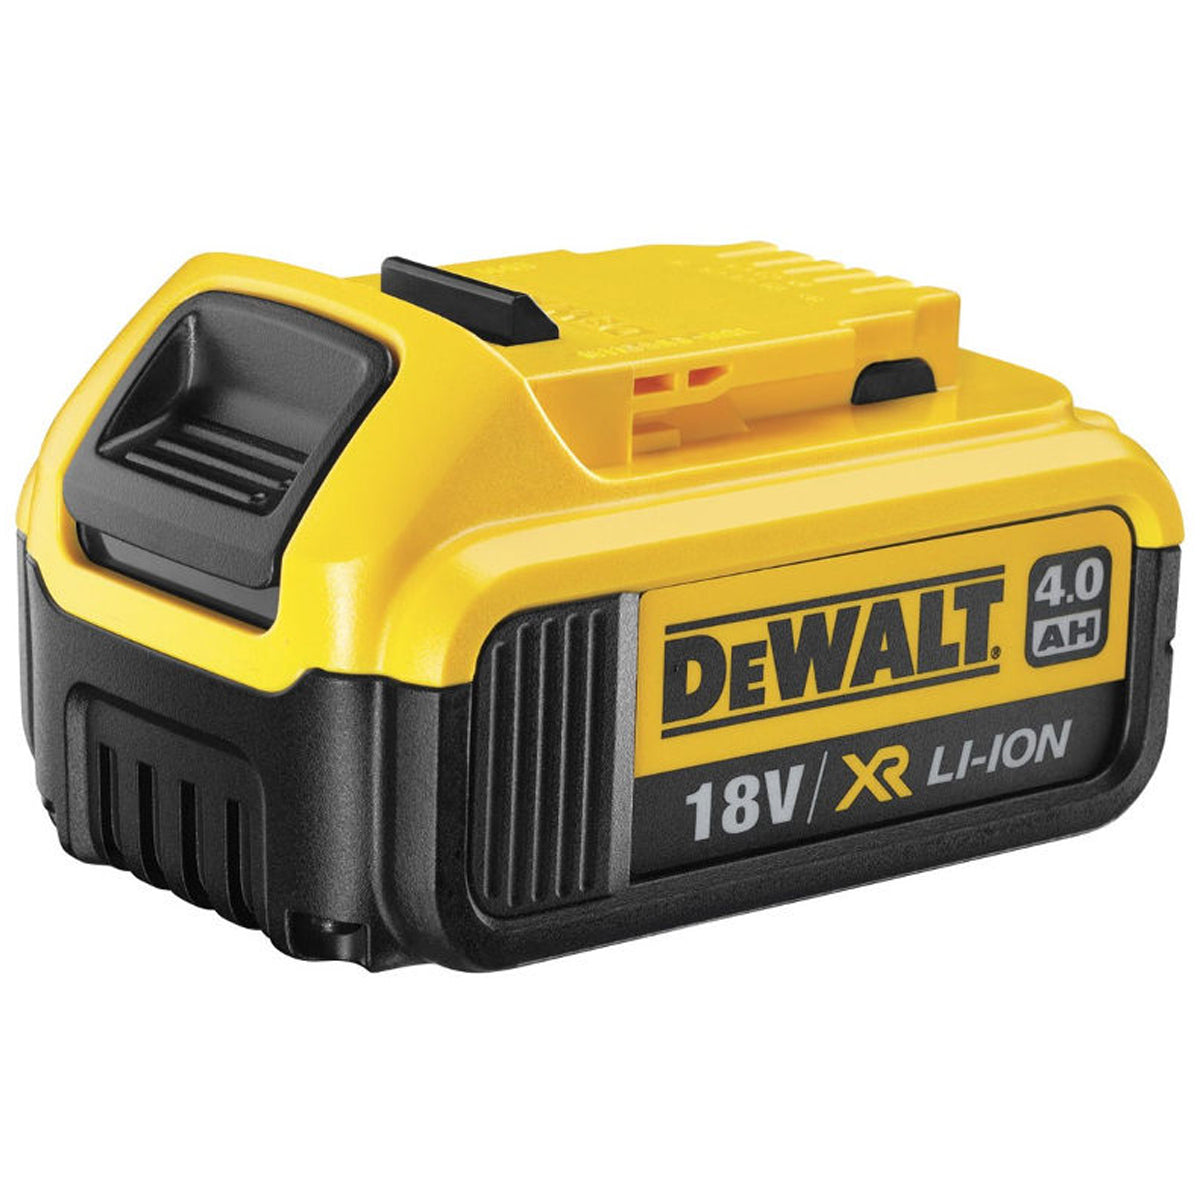 DeWalt DCN660N 18V Brushless Second Fix Nailer with 1 x 4.0Ah Battery, Charger & 24